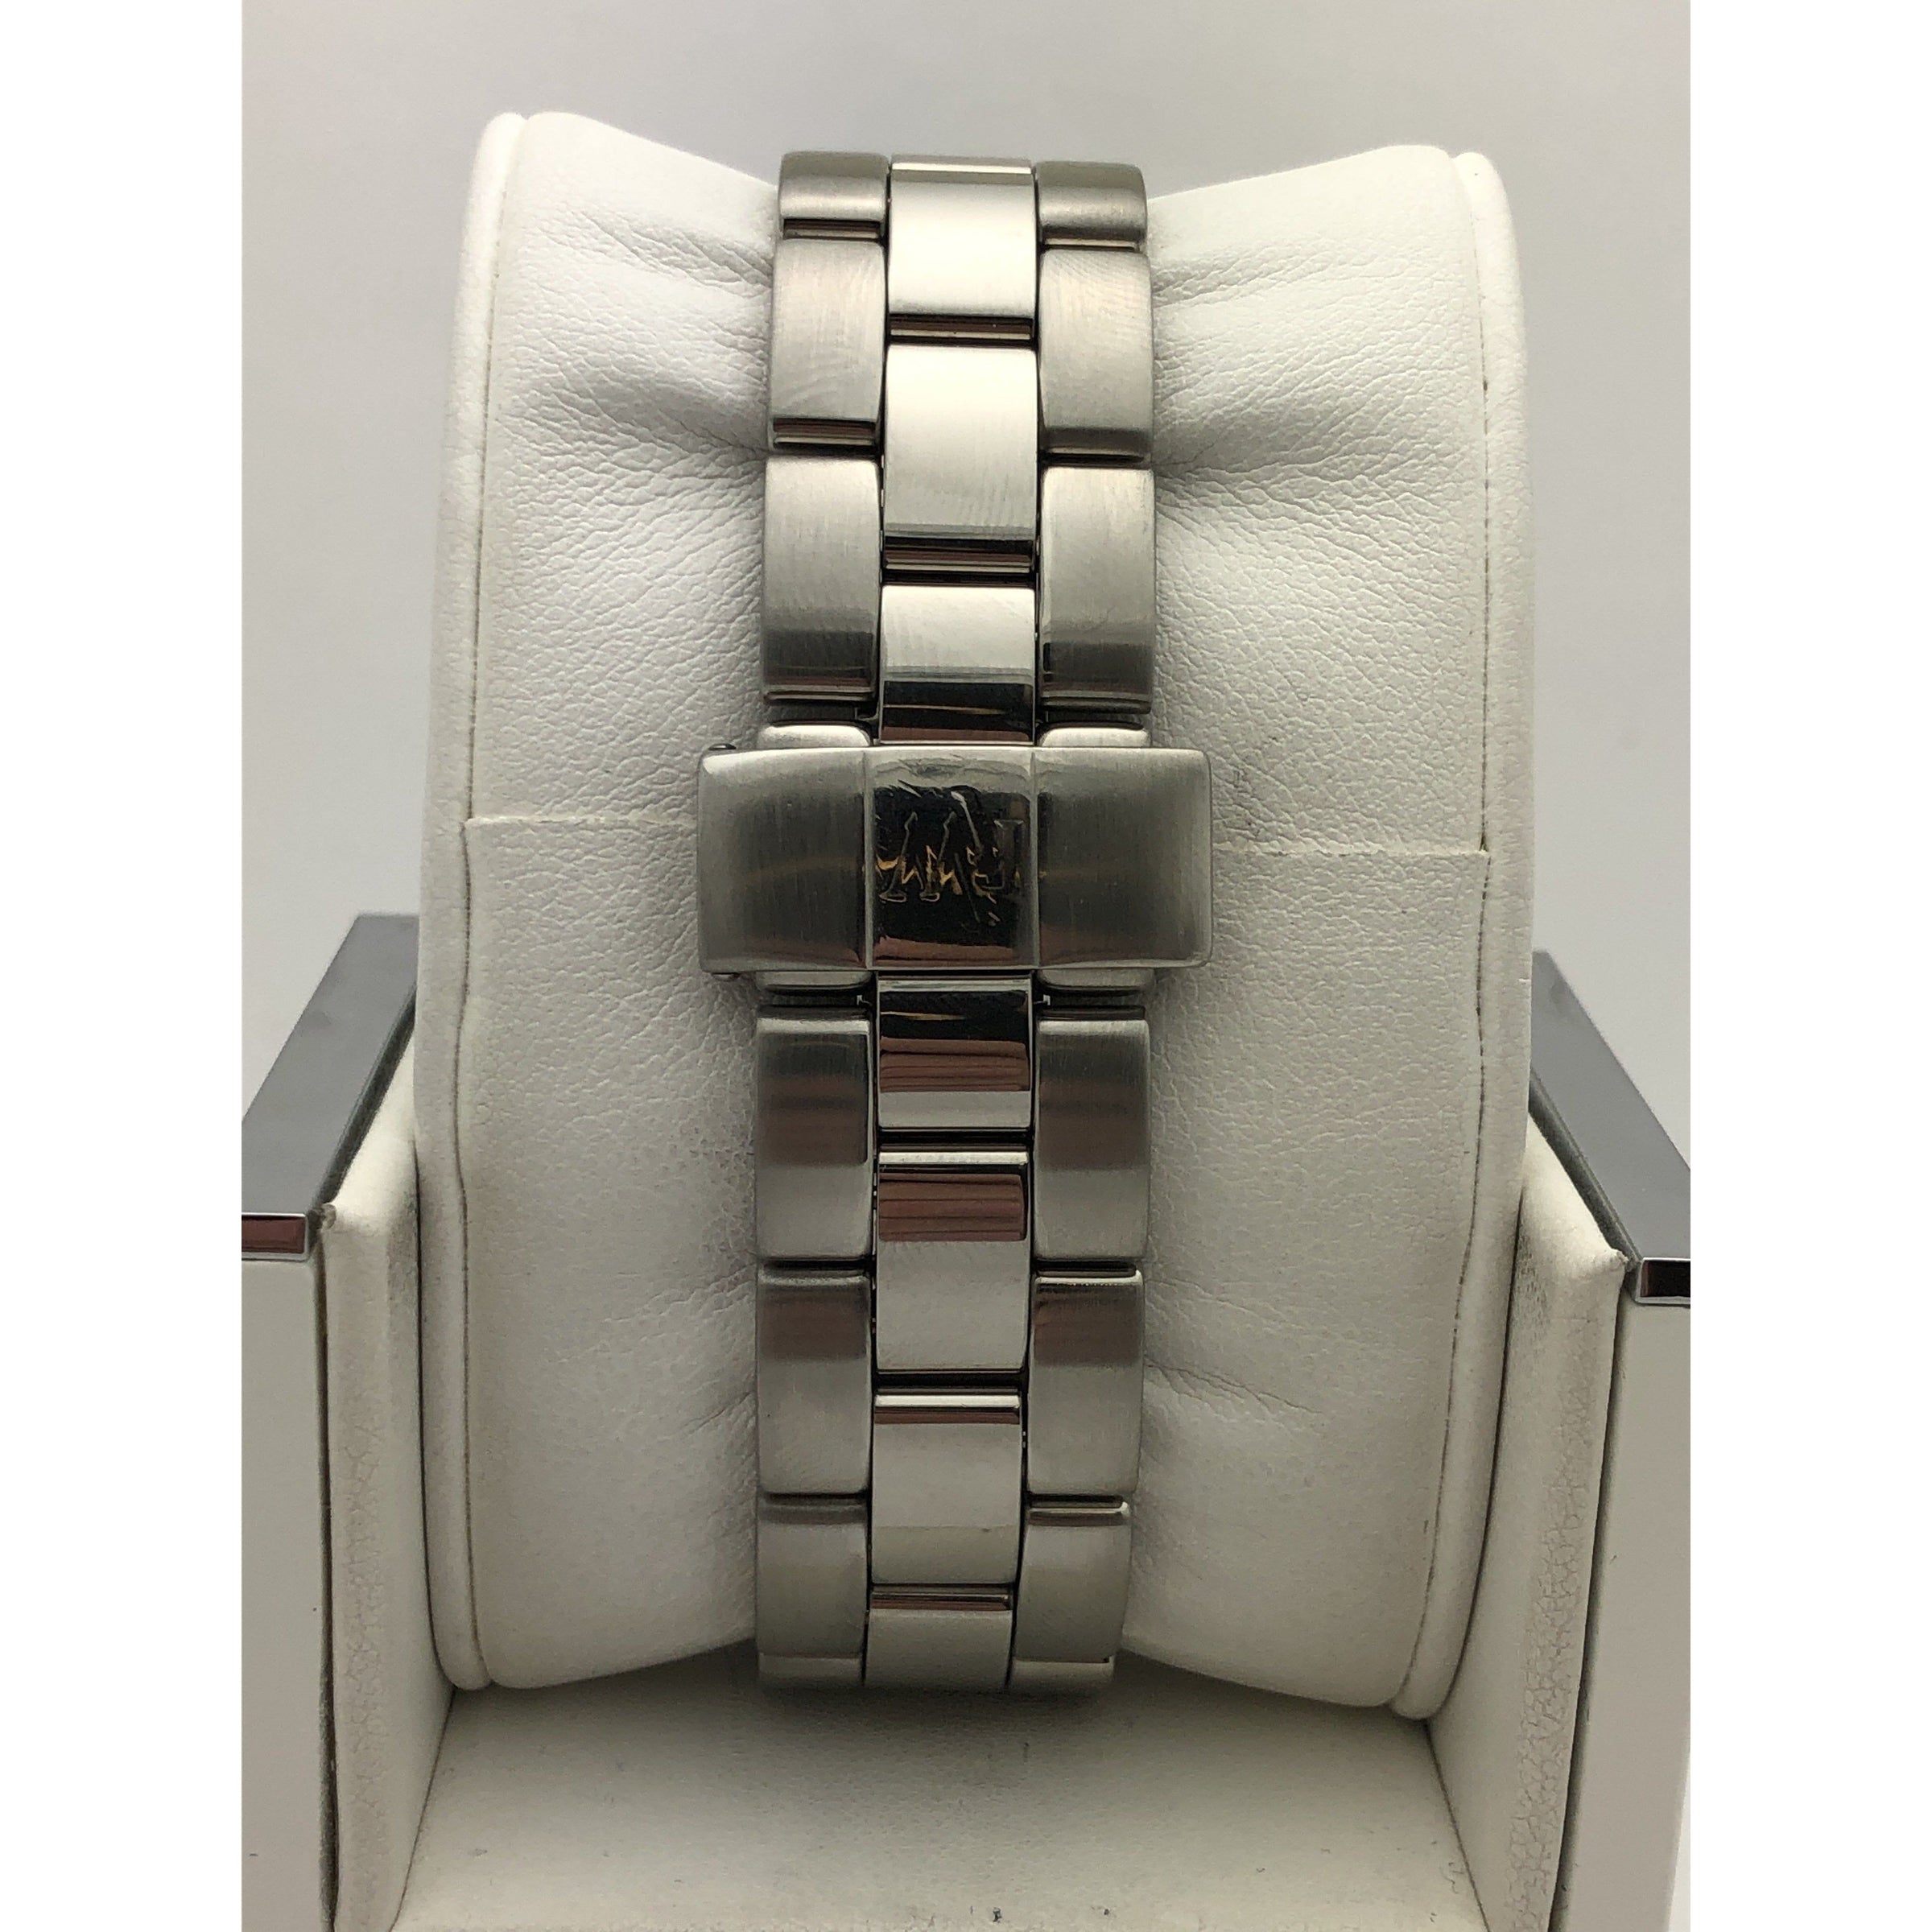 Sold at Auction: Gentlemans AMADEUS QUARTZ CHRONOGRAPH in silver tone,  White face Multi dial Tank model with matching bracelet finished in  stainless steel. Full working order. Exceptional condition.